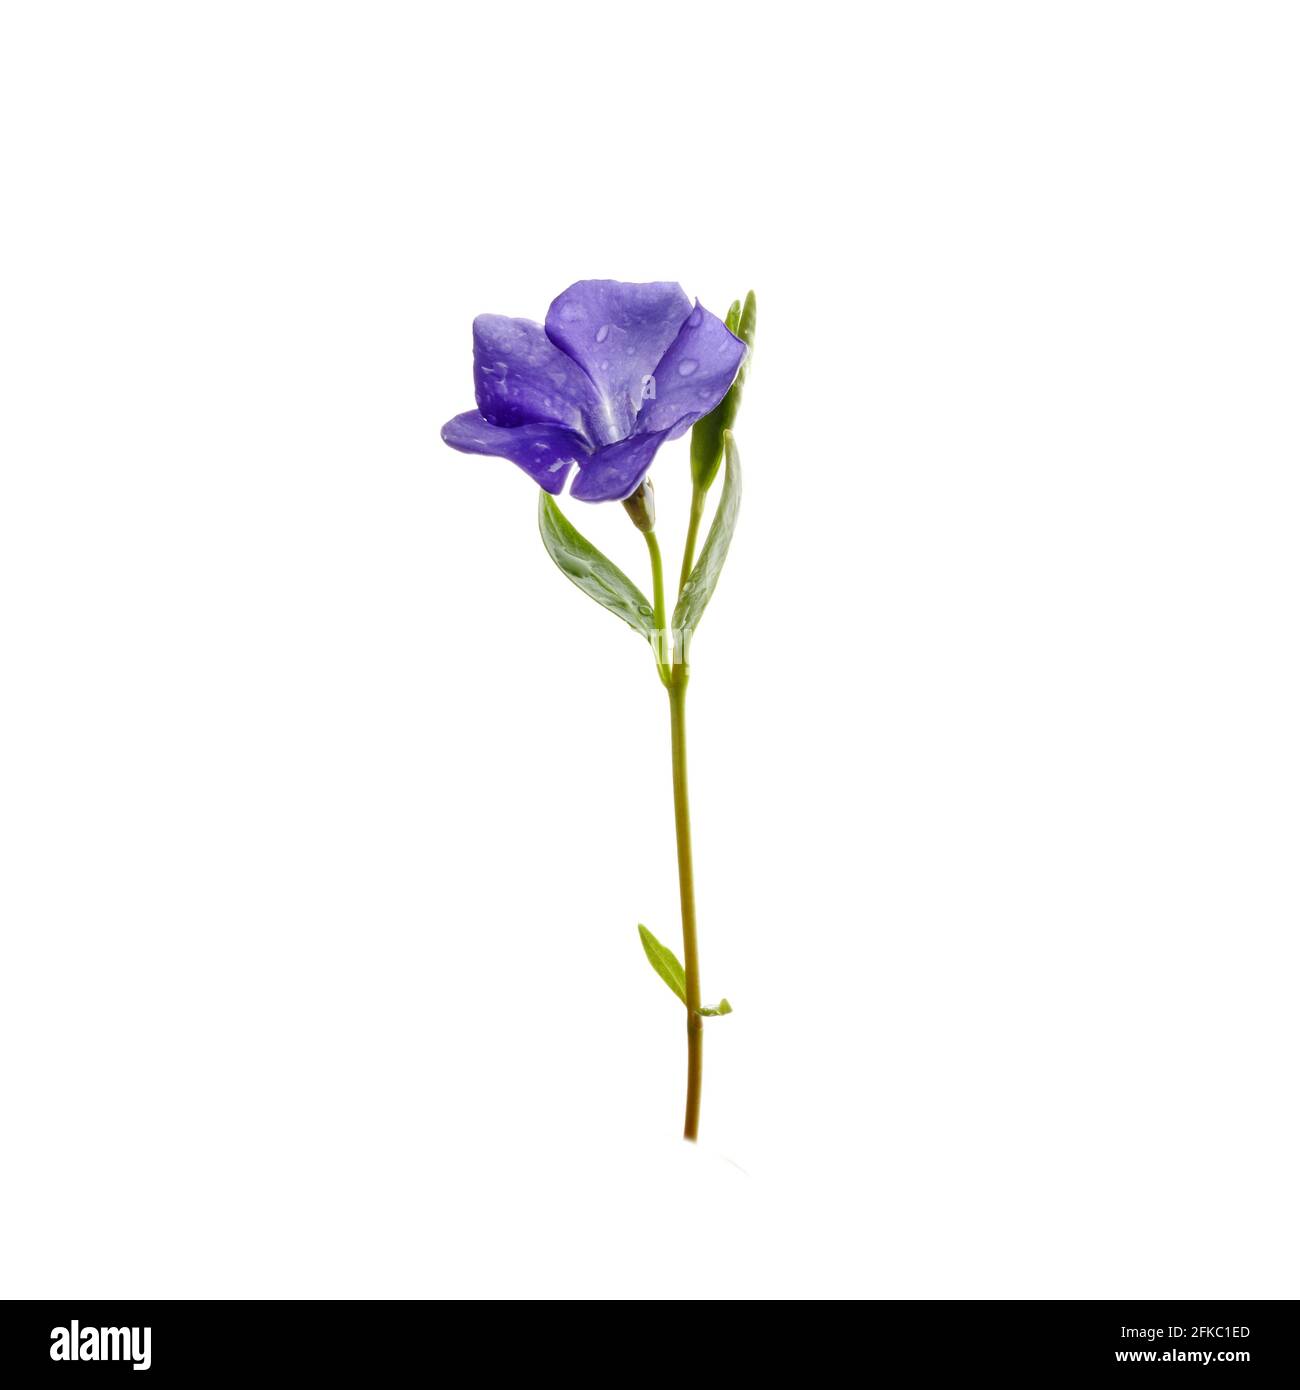 Beautiful blue periwinkle flower with isolated on white background. Purple flower. Stock Photo